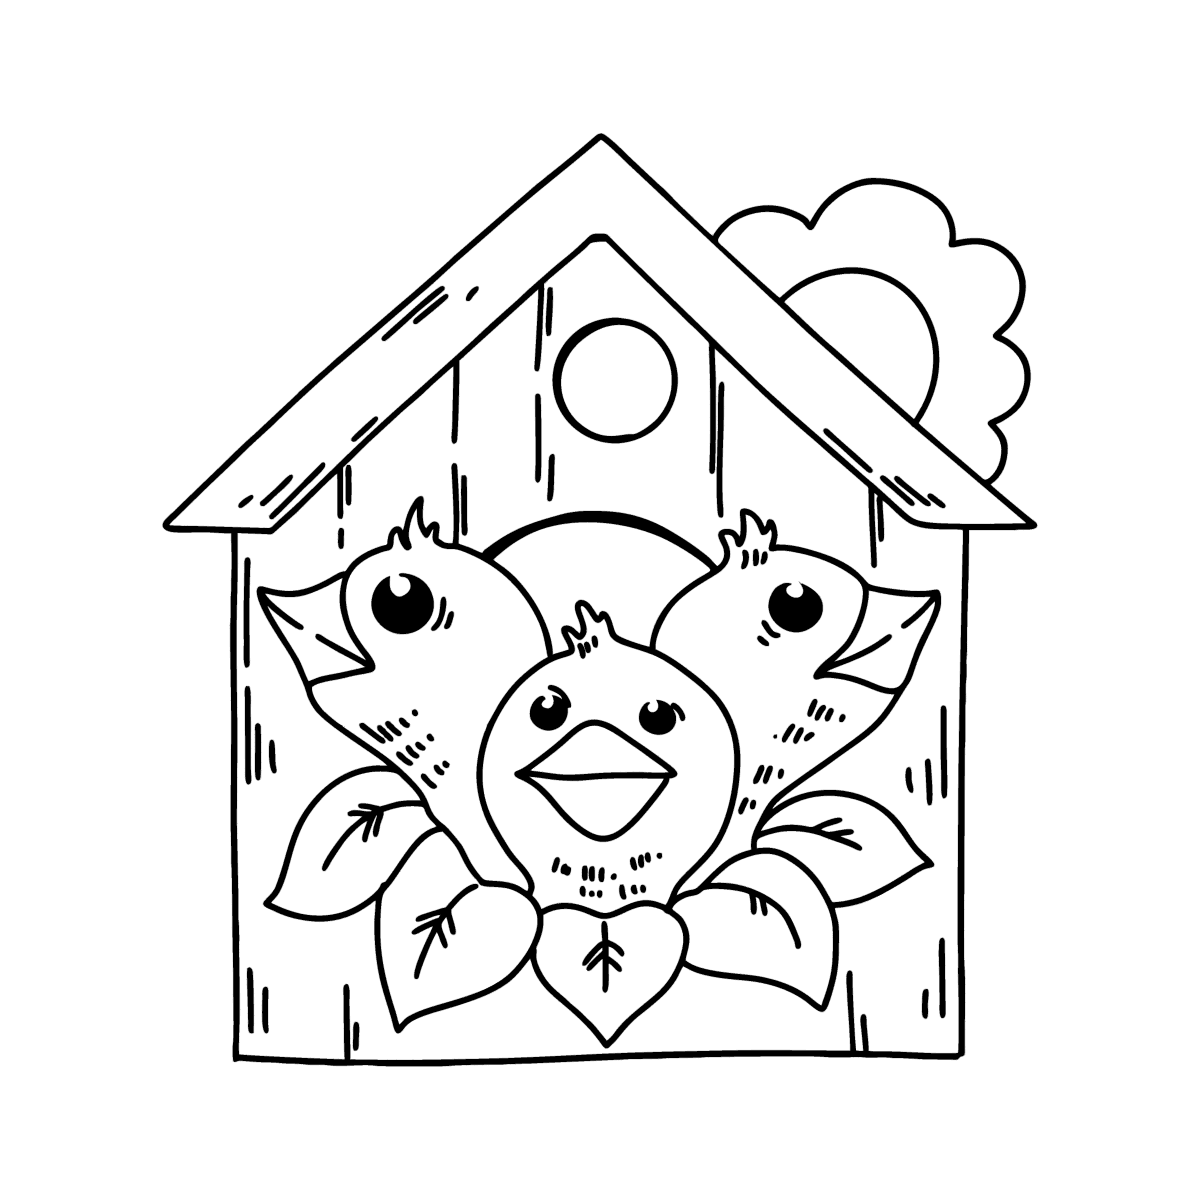 Chicks in a Birdhouse coloring page ♥ Online and Print for Free